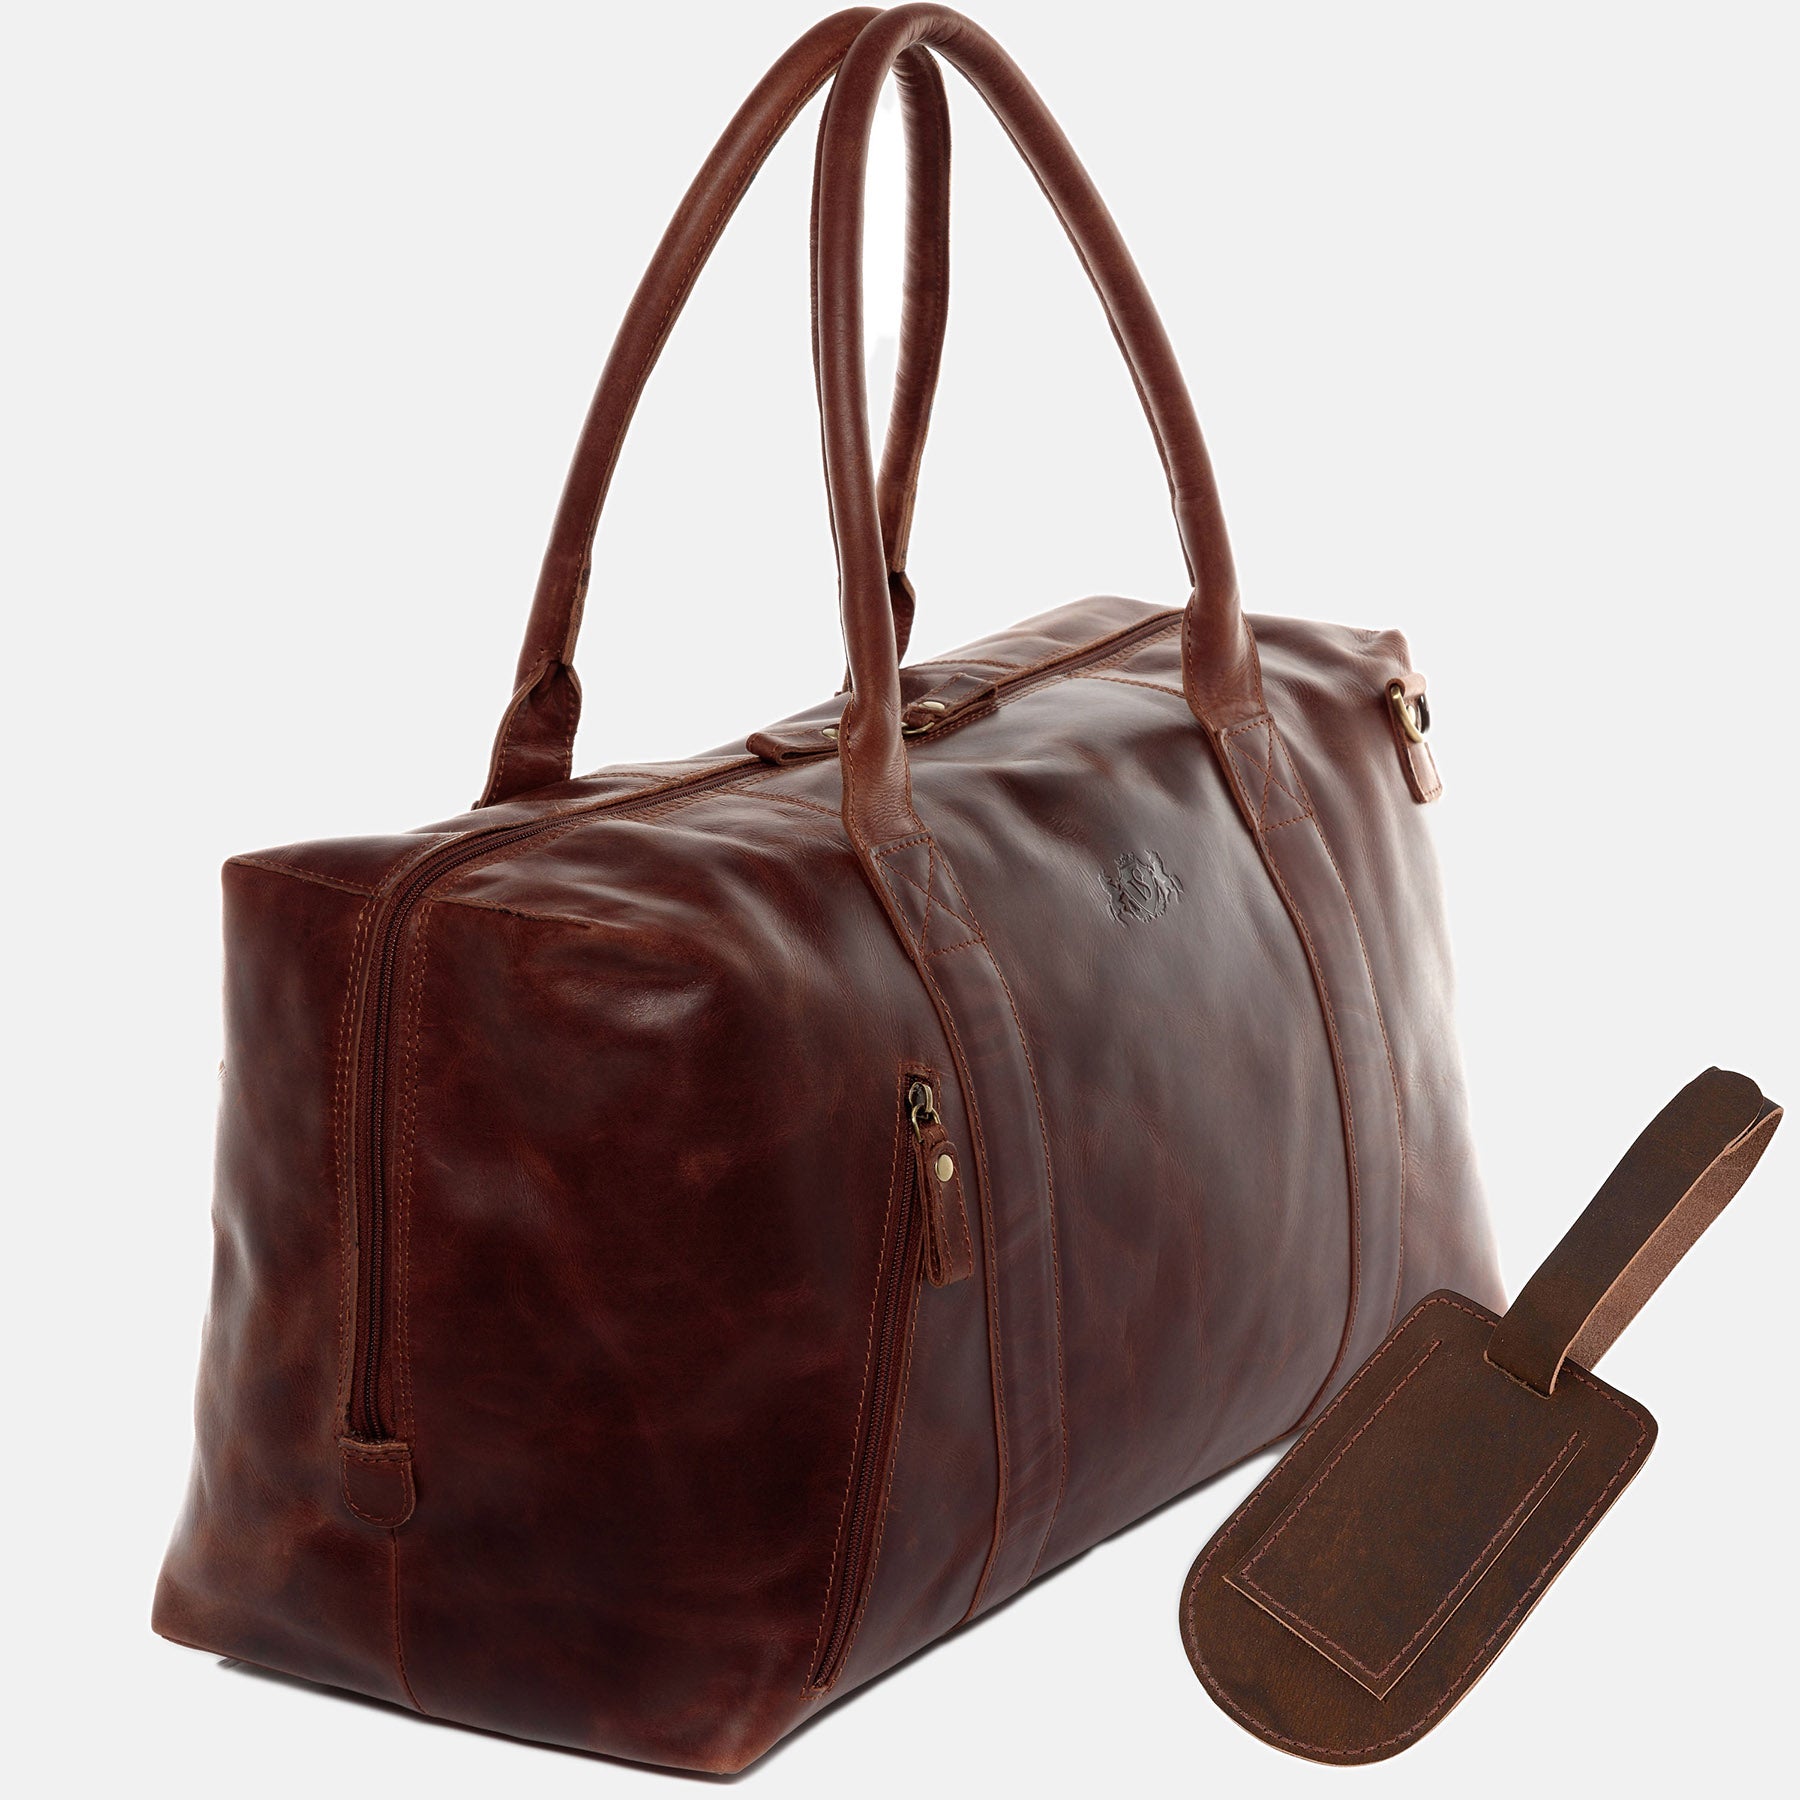 Travel bag with address tag YALE ZIP natural leather brown-cognac